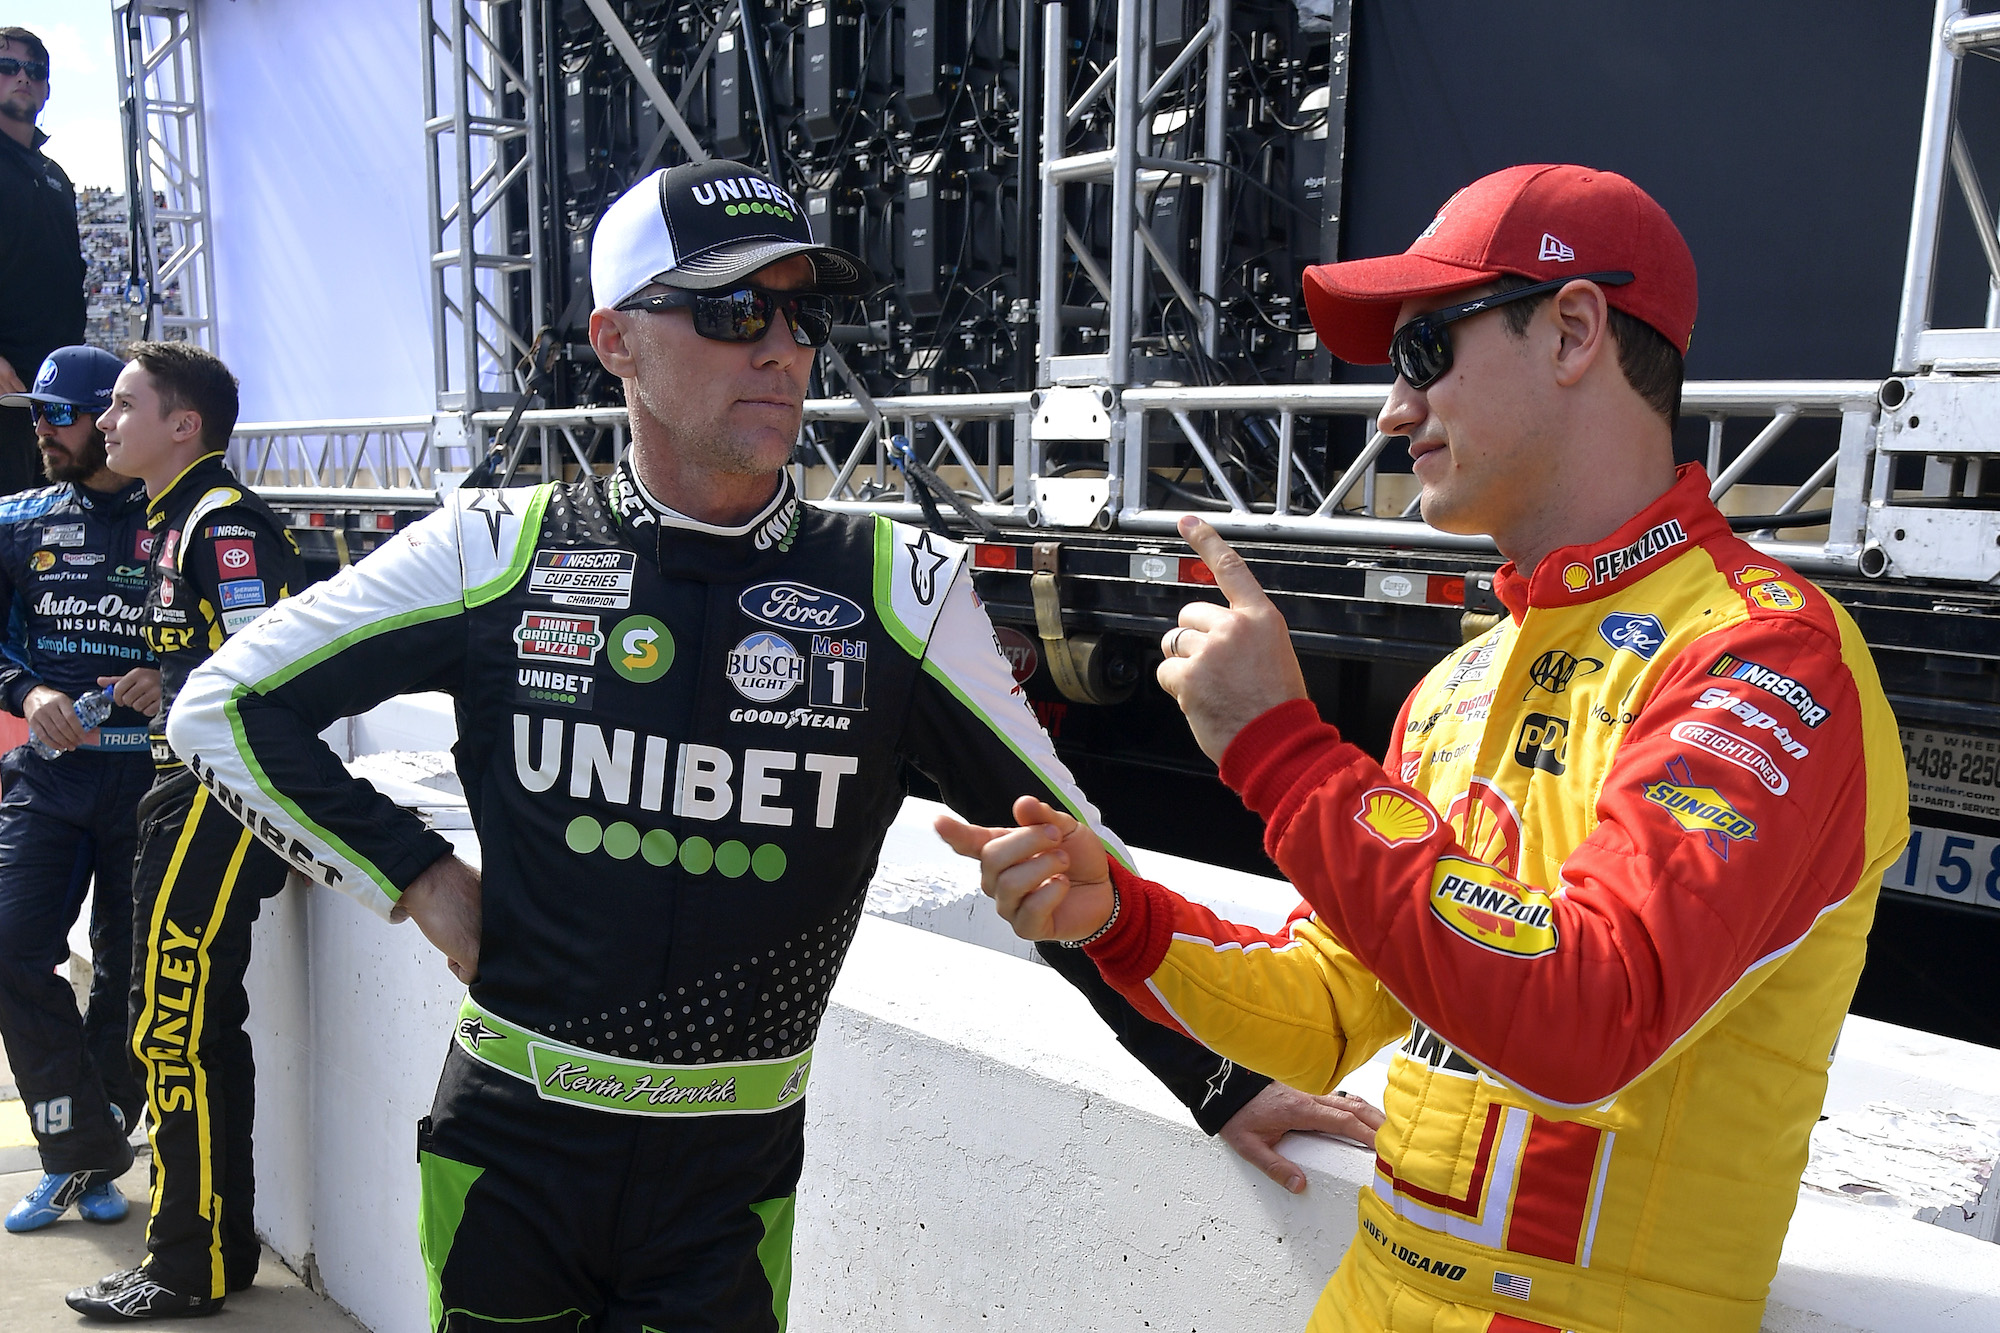 Kevin Harvick and Joey Logano talk backstage of prerace ceremonies prior to the NASCAR Cup Series Xfinity 500 at Martinsville Speedway on October 31, 2021. | Photo by Logan Riely/Getty Images